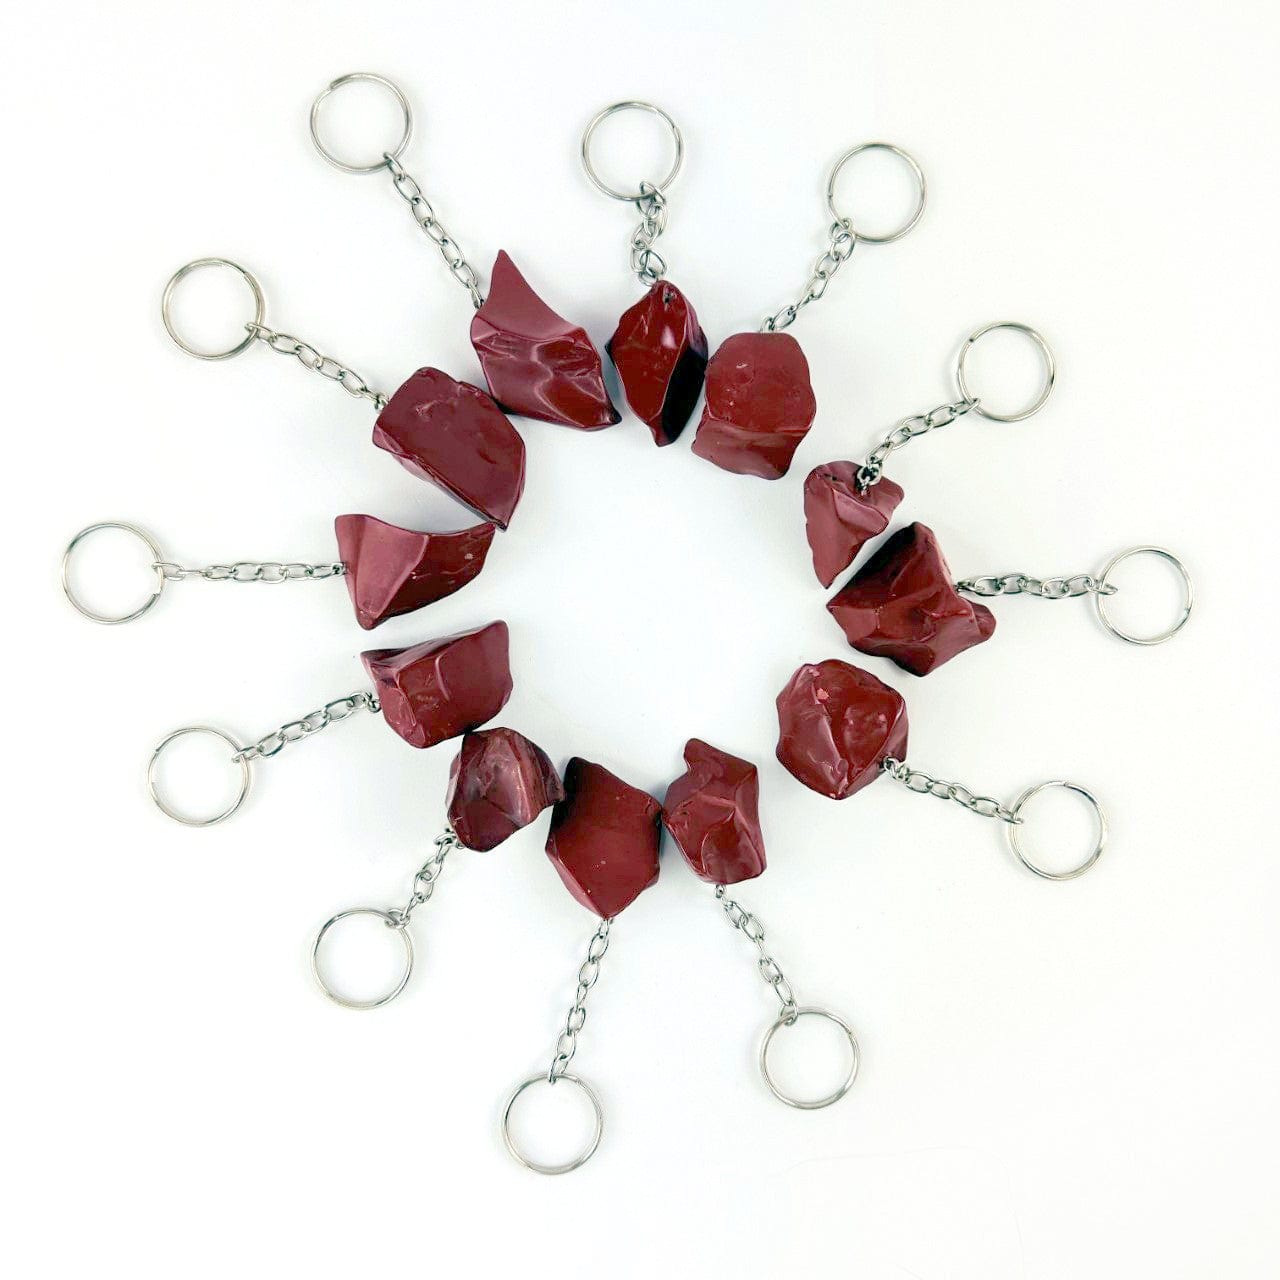 12 Red Jasper Polished Freeform Silver Toned Key Chains displayed in a circle showing size and shape variations